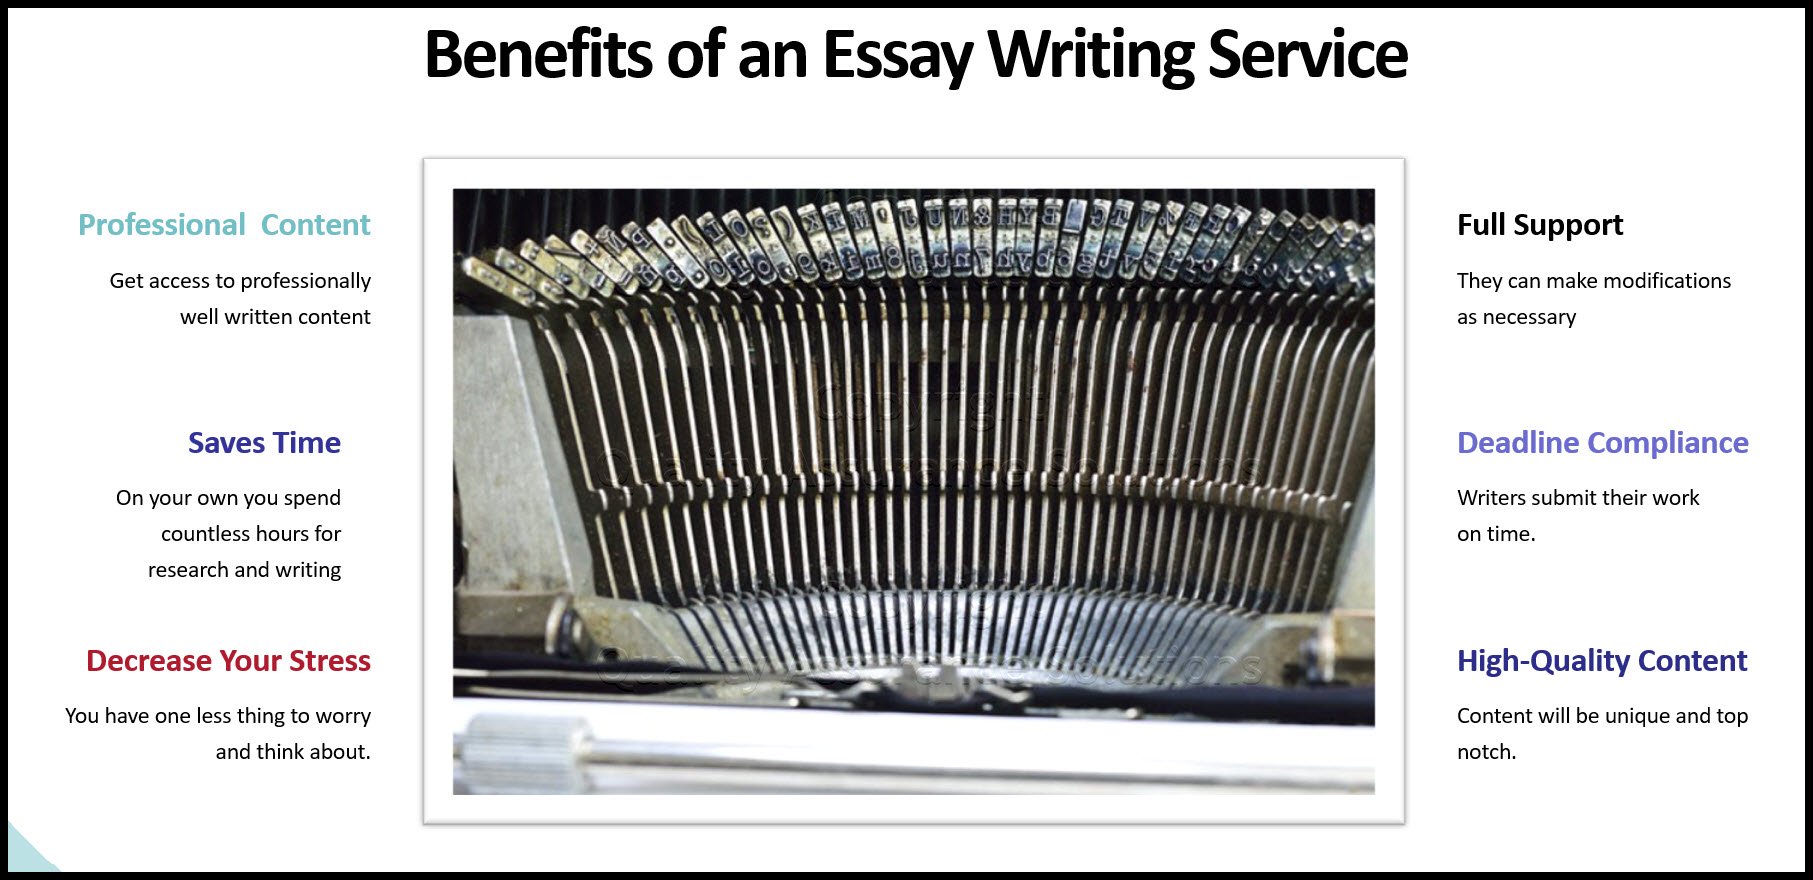 Learn the benefits to using an English Essay Writing Service to make your content shine. 